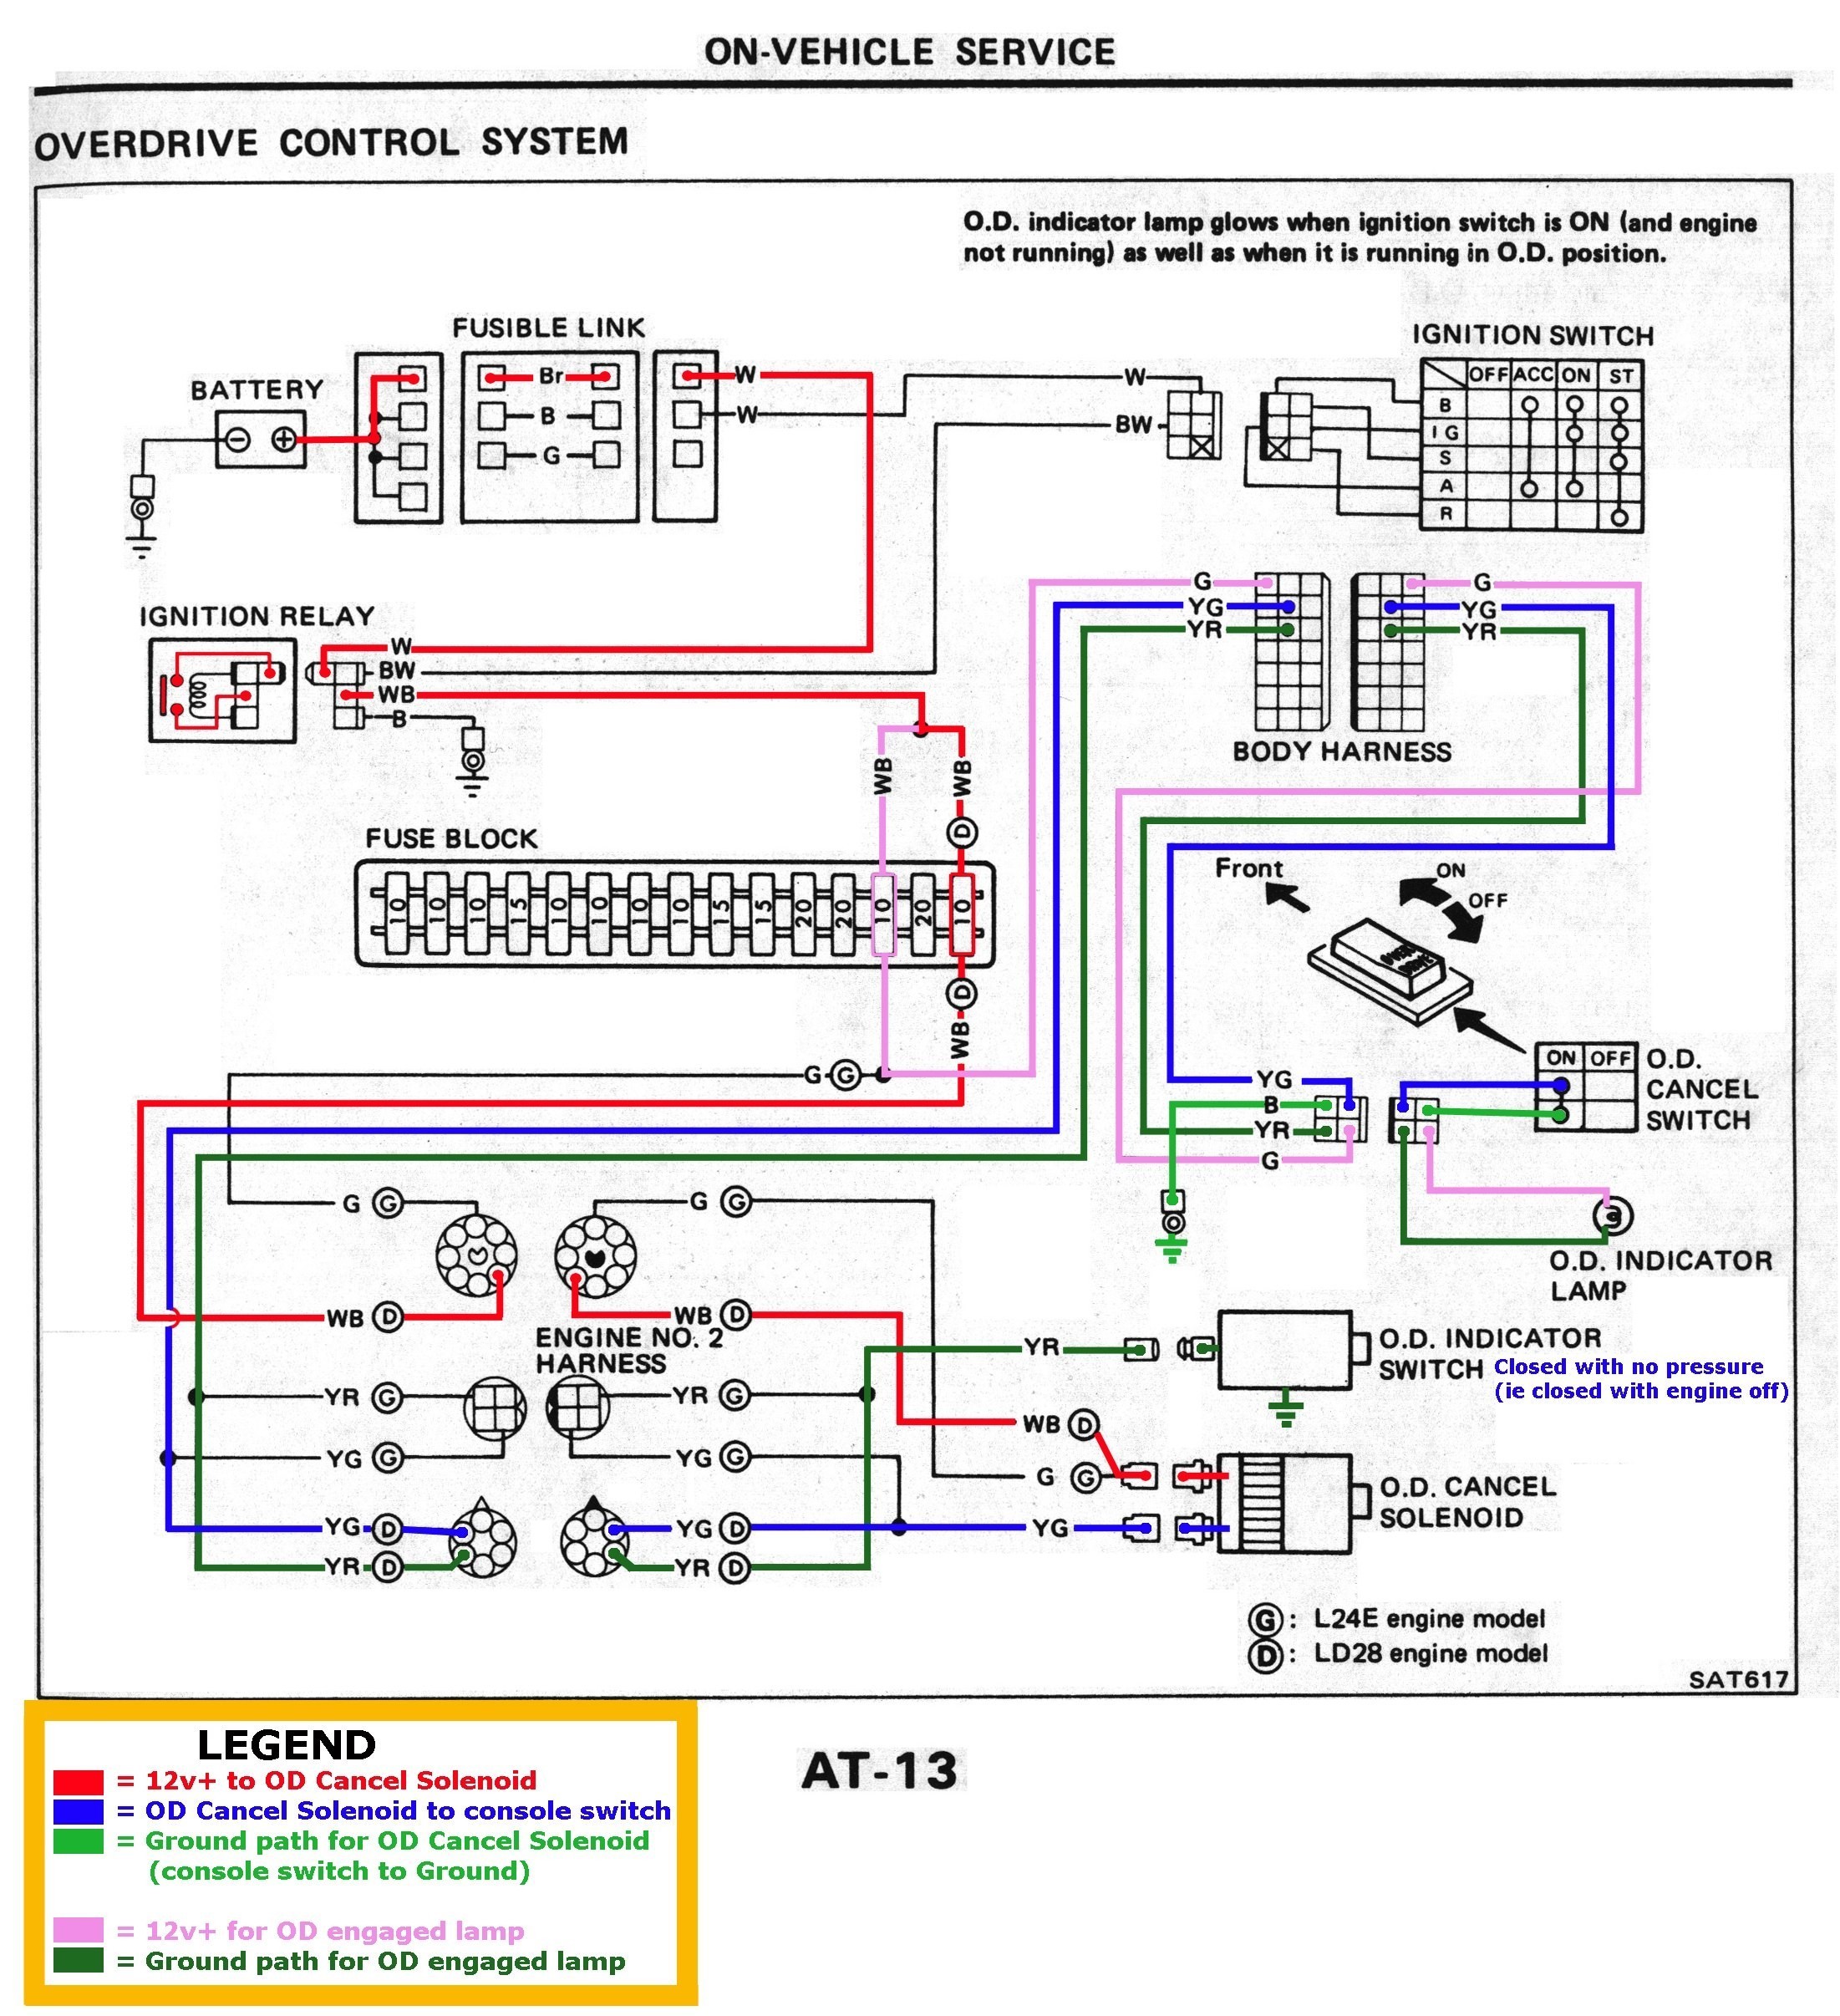 1999 Nissan Quest Engine Diagram Take A Look About 2000 Nissan Maxima Engine with Awesome Gallery Of 1999 Nissan Quest Engine Diagram